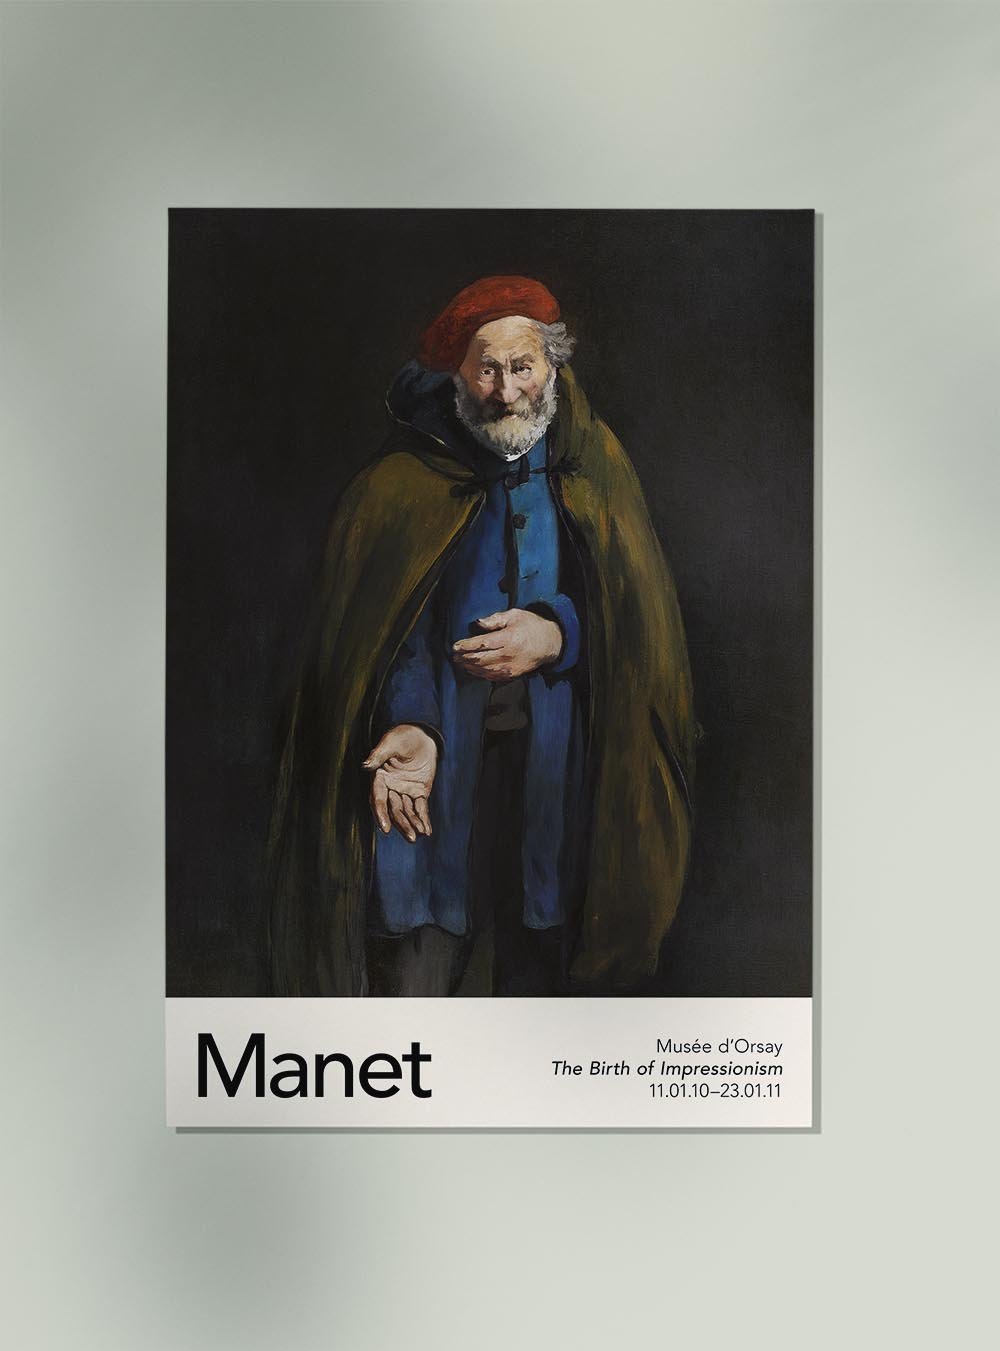 Beggar with a Duffle Coat by Manet Exhibition Poster